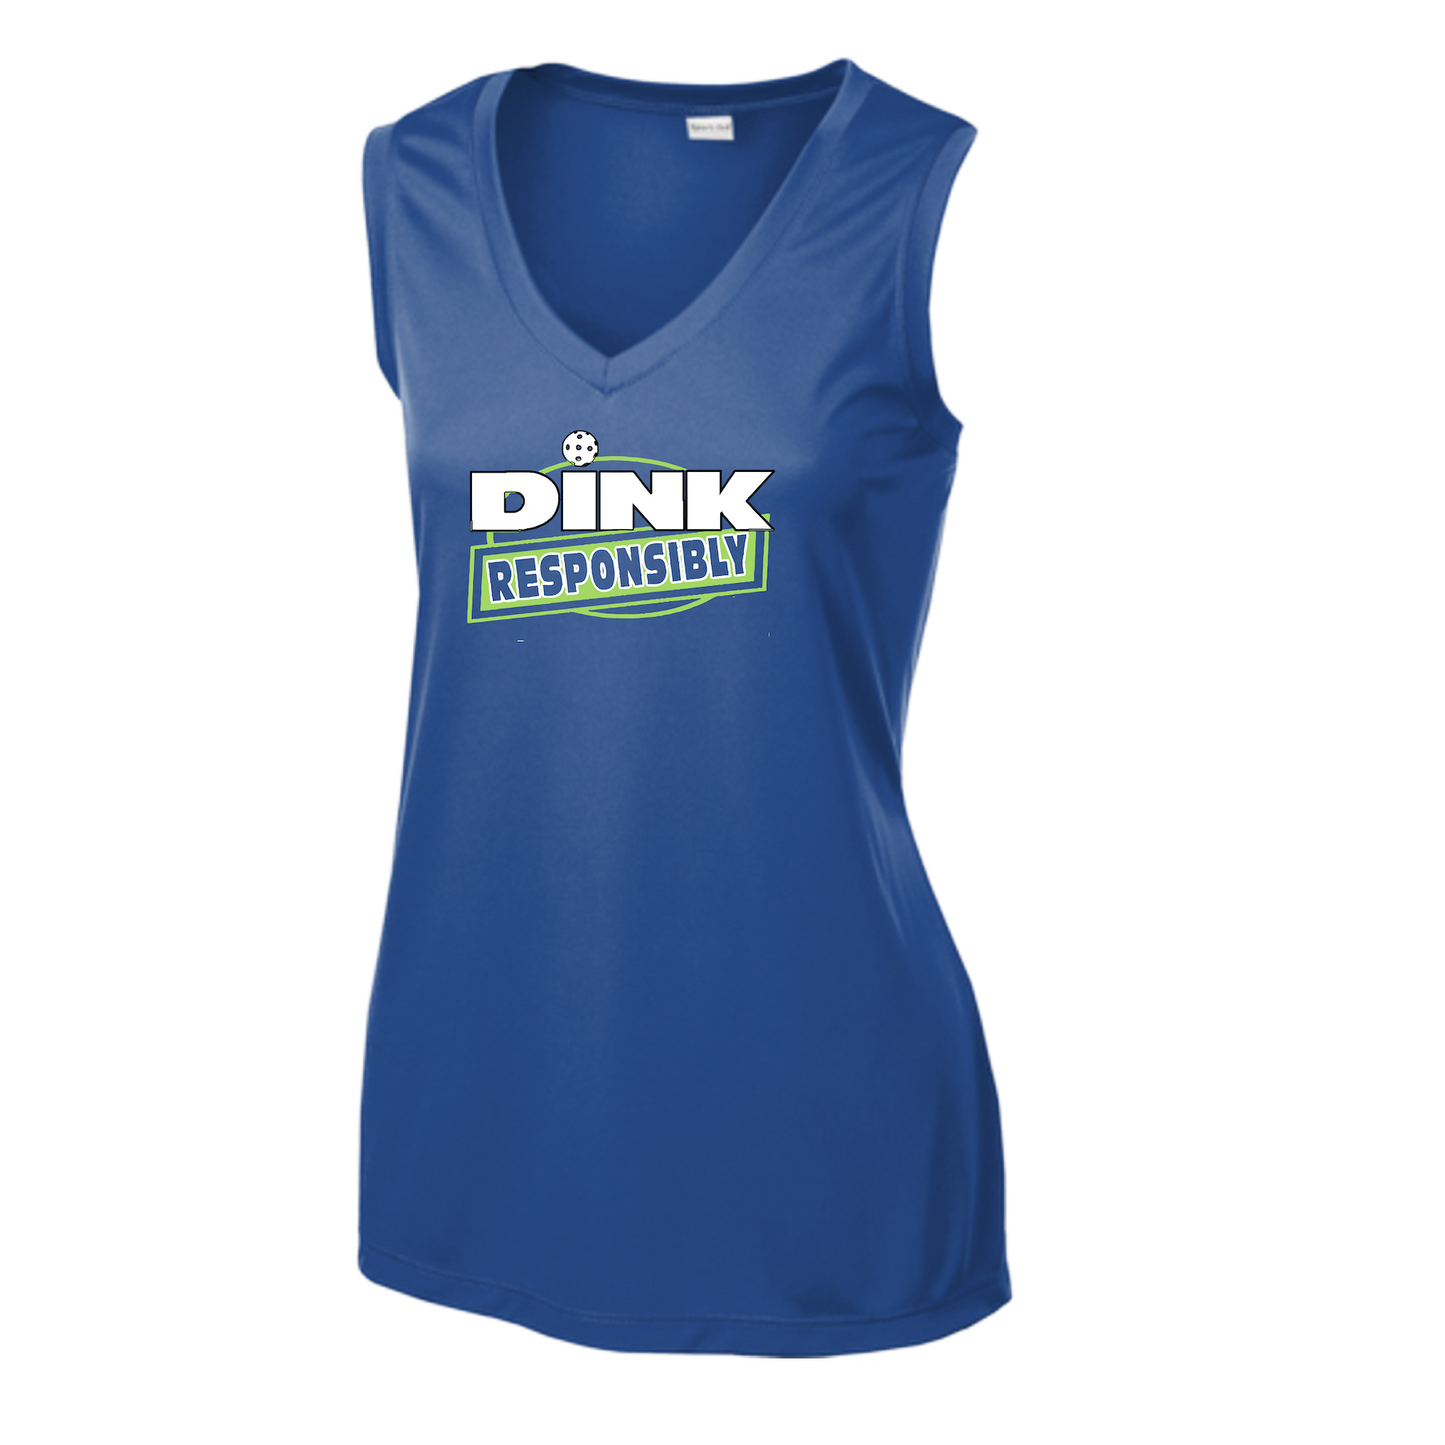 Pickleball Design: Dink Responsibly  Women's Style: Sleeveless Tank  Shirts are lightweight, roomy and highly breathable. These moisture-wicking shirts are designed for athletic performance. They feature PosiCharge technology to lock in color and prevent logos from fading. Removable tag and set-in sleeves for comfort.